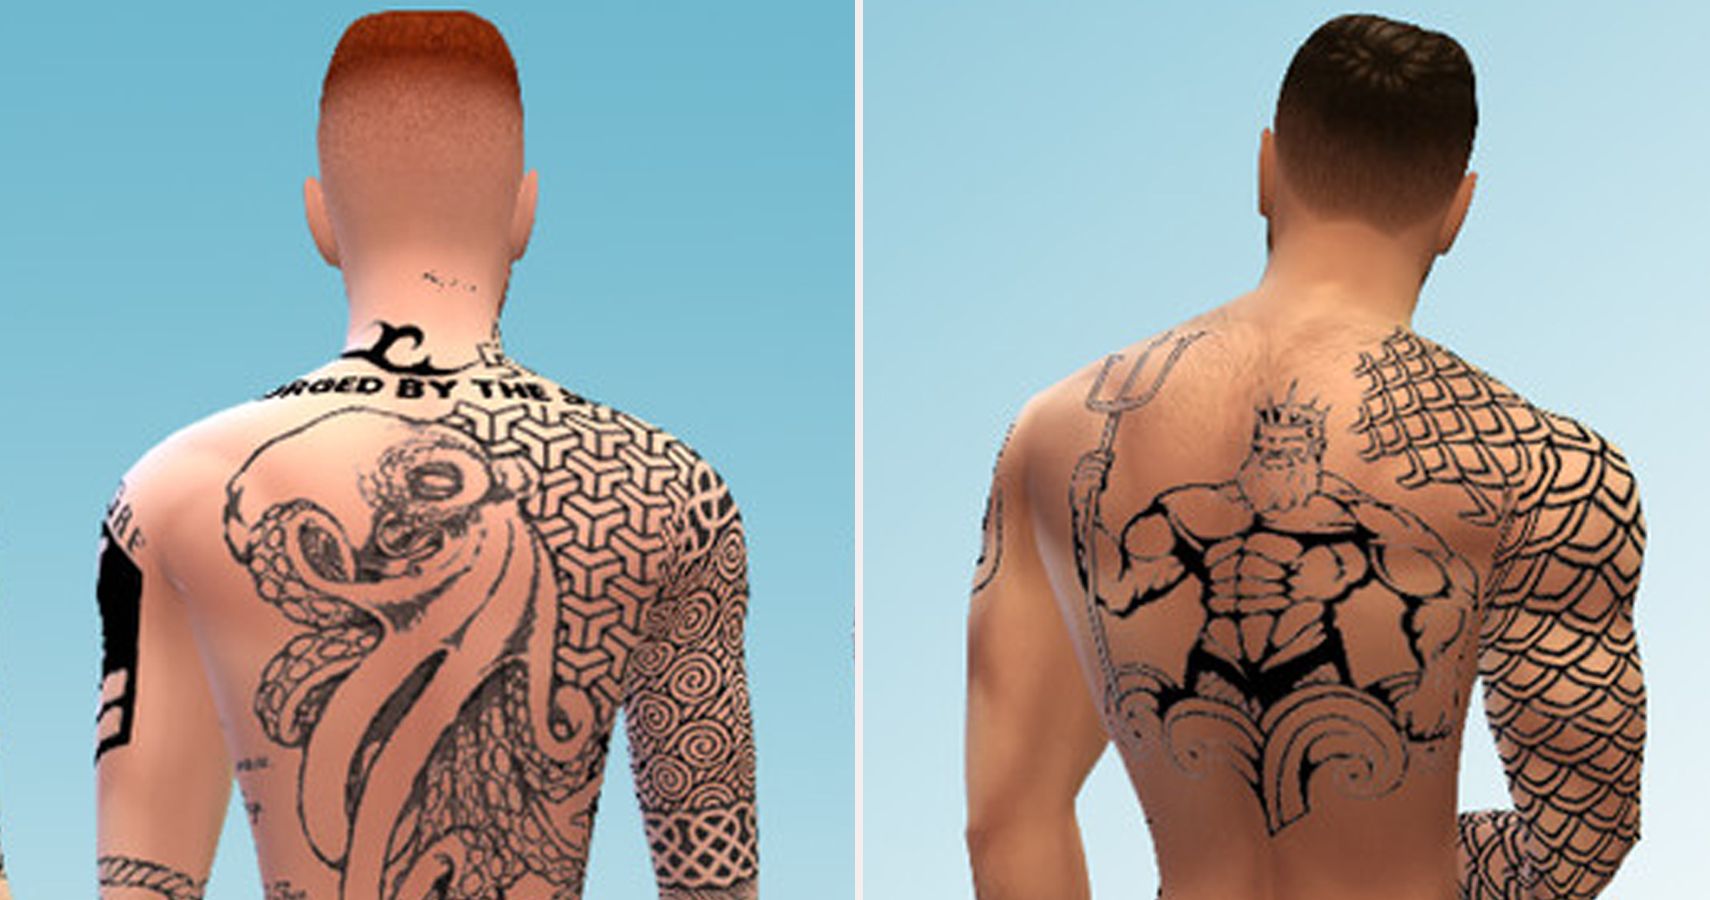 Left side octopus tattoo on a sims back. Right side nautical style tattoo on male sims back.